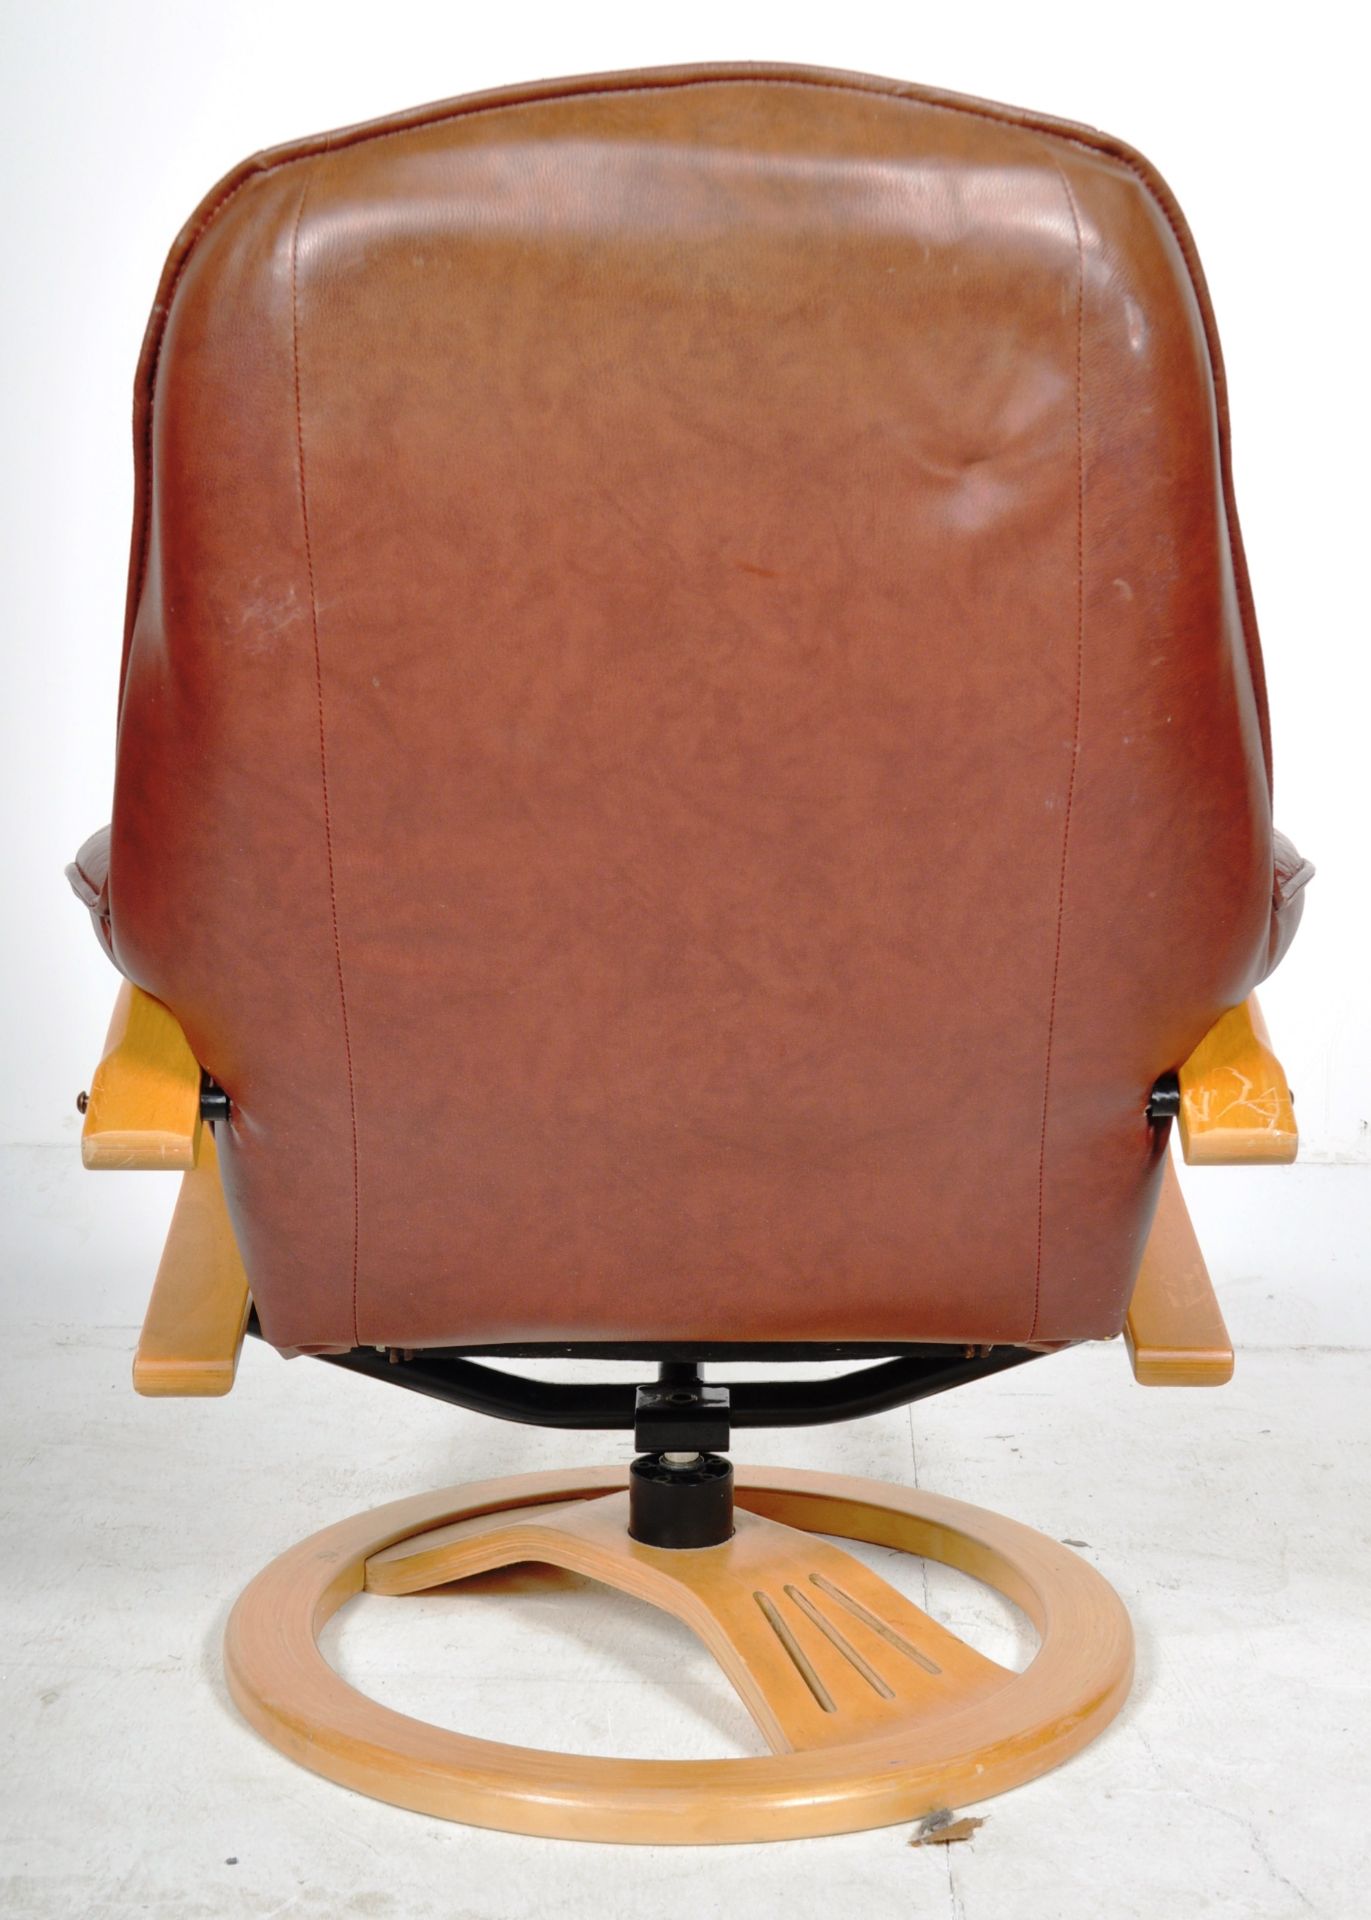 CONTEMPORARY DARK BROWN LEATHER UPHOLSTERED RECLINING CHAIR - Image 7 of 8